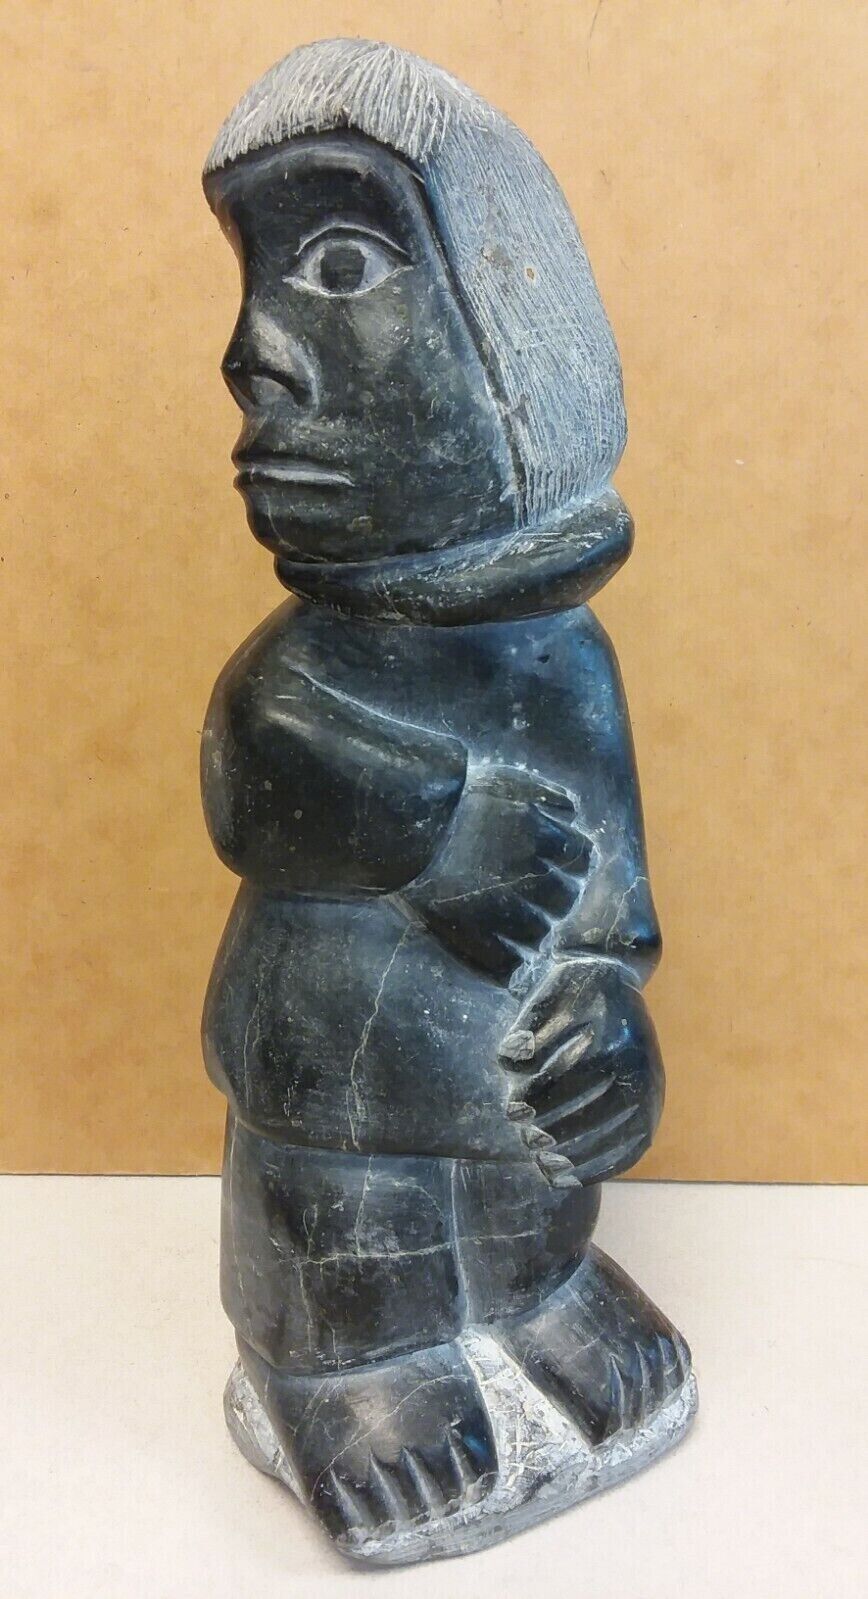 INUIT Canada Soapstone Carving TALL MAN Very Unique Carved Sculpture ESKIMO